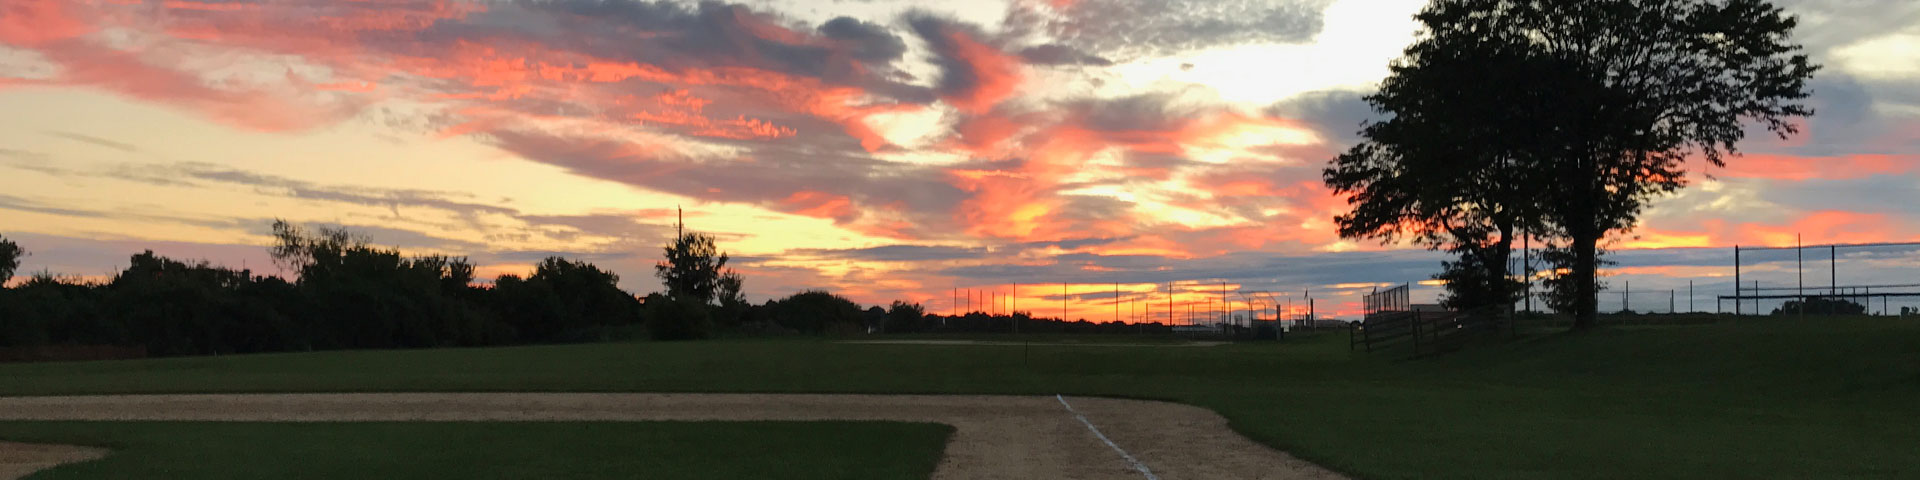 A beautiful sunset filled with tinges of orange, red, and yellow. A baseball field appears in the foreground; a large tree is silhouetted off to the right in the background